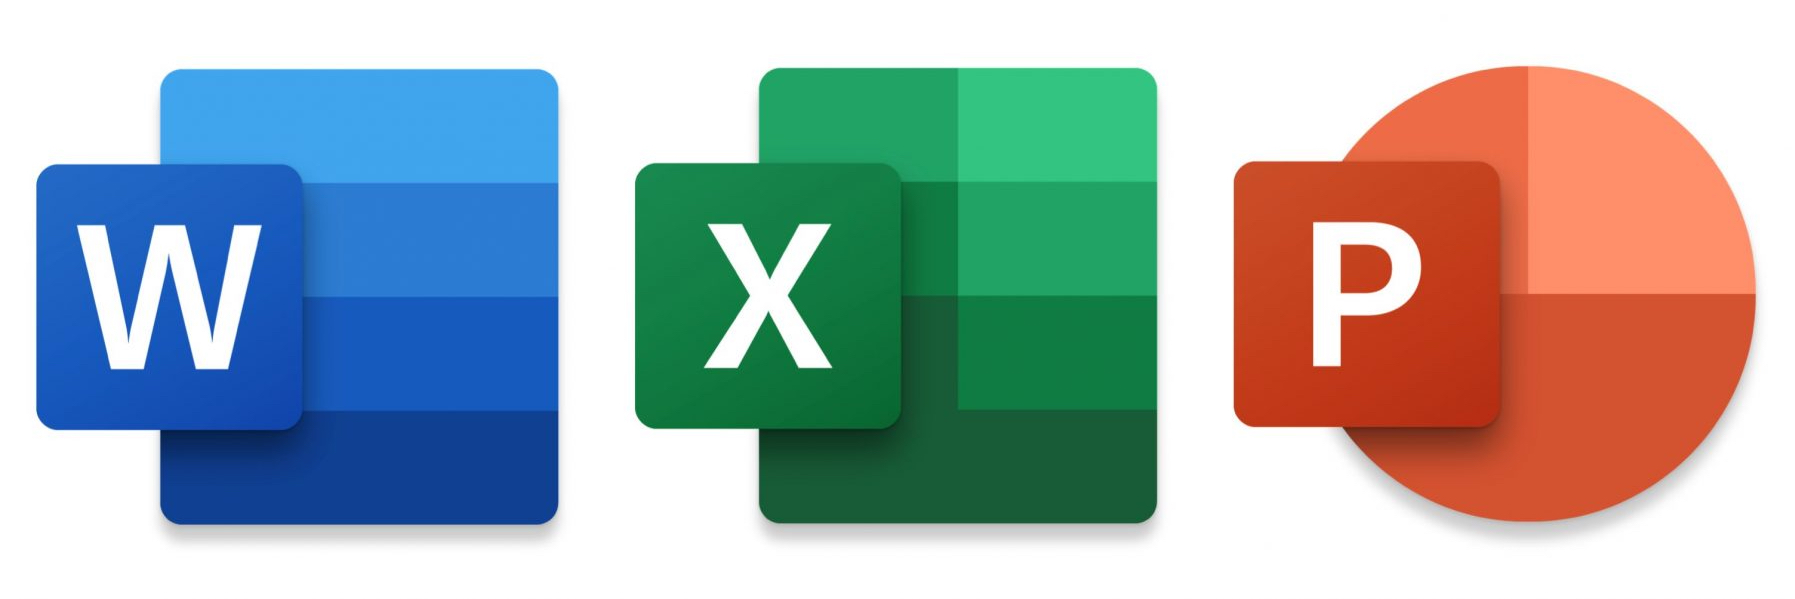 word excel powerpoint free download